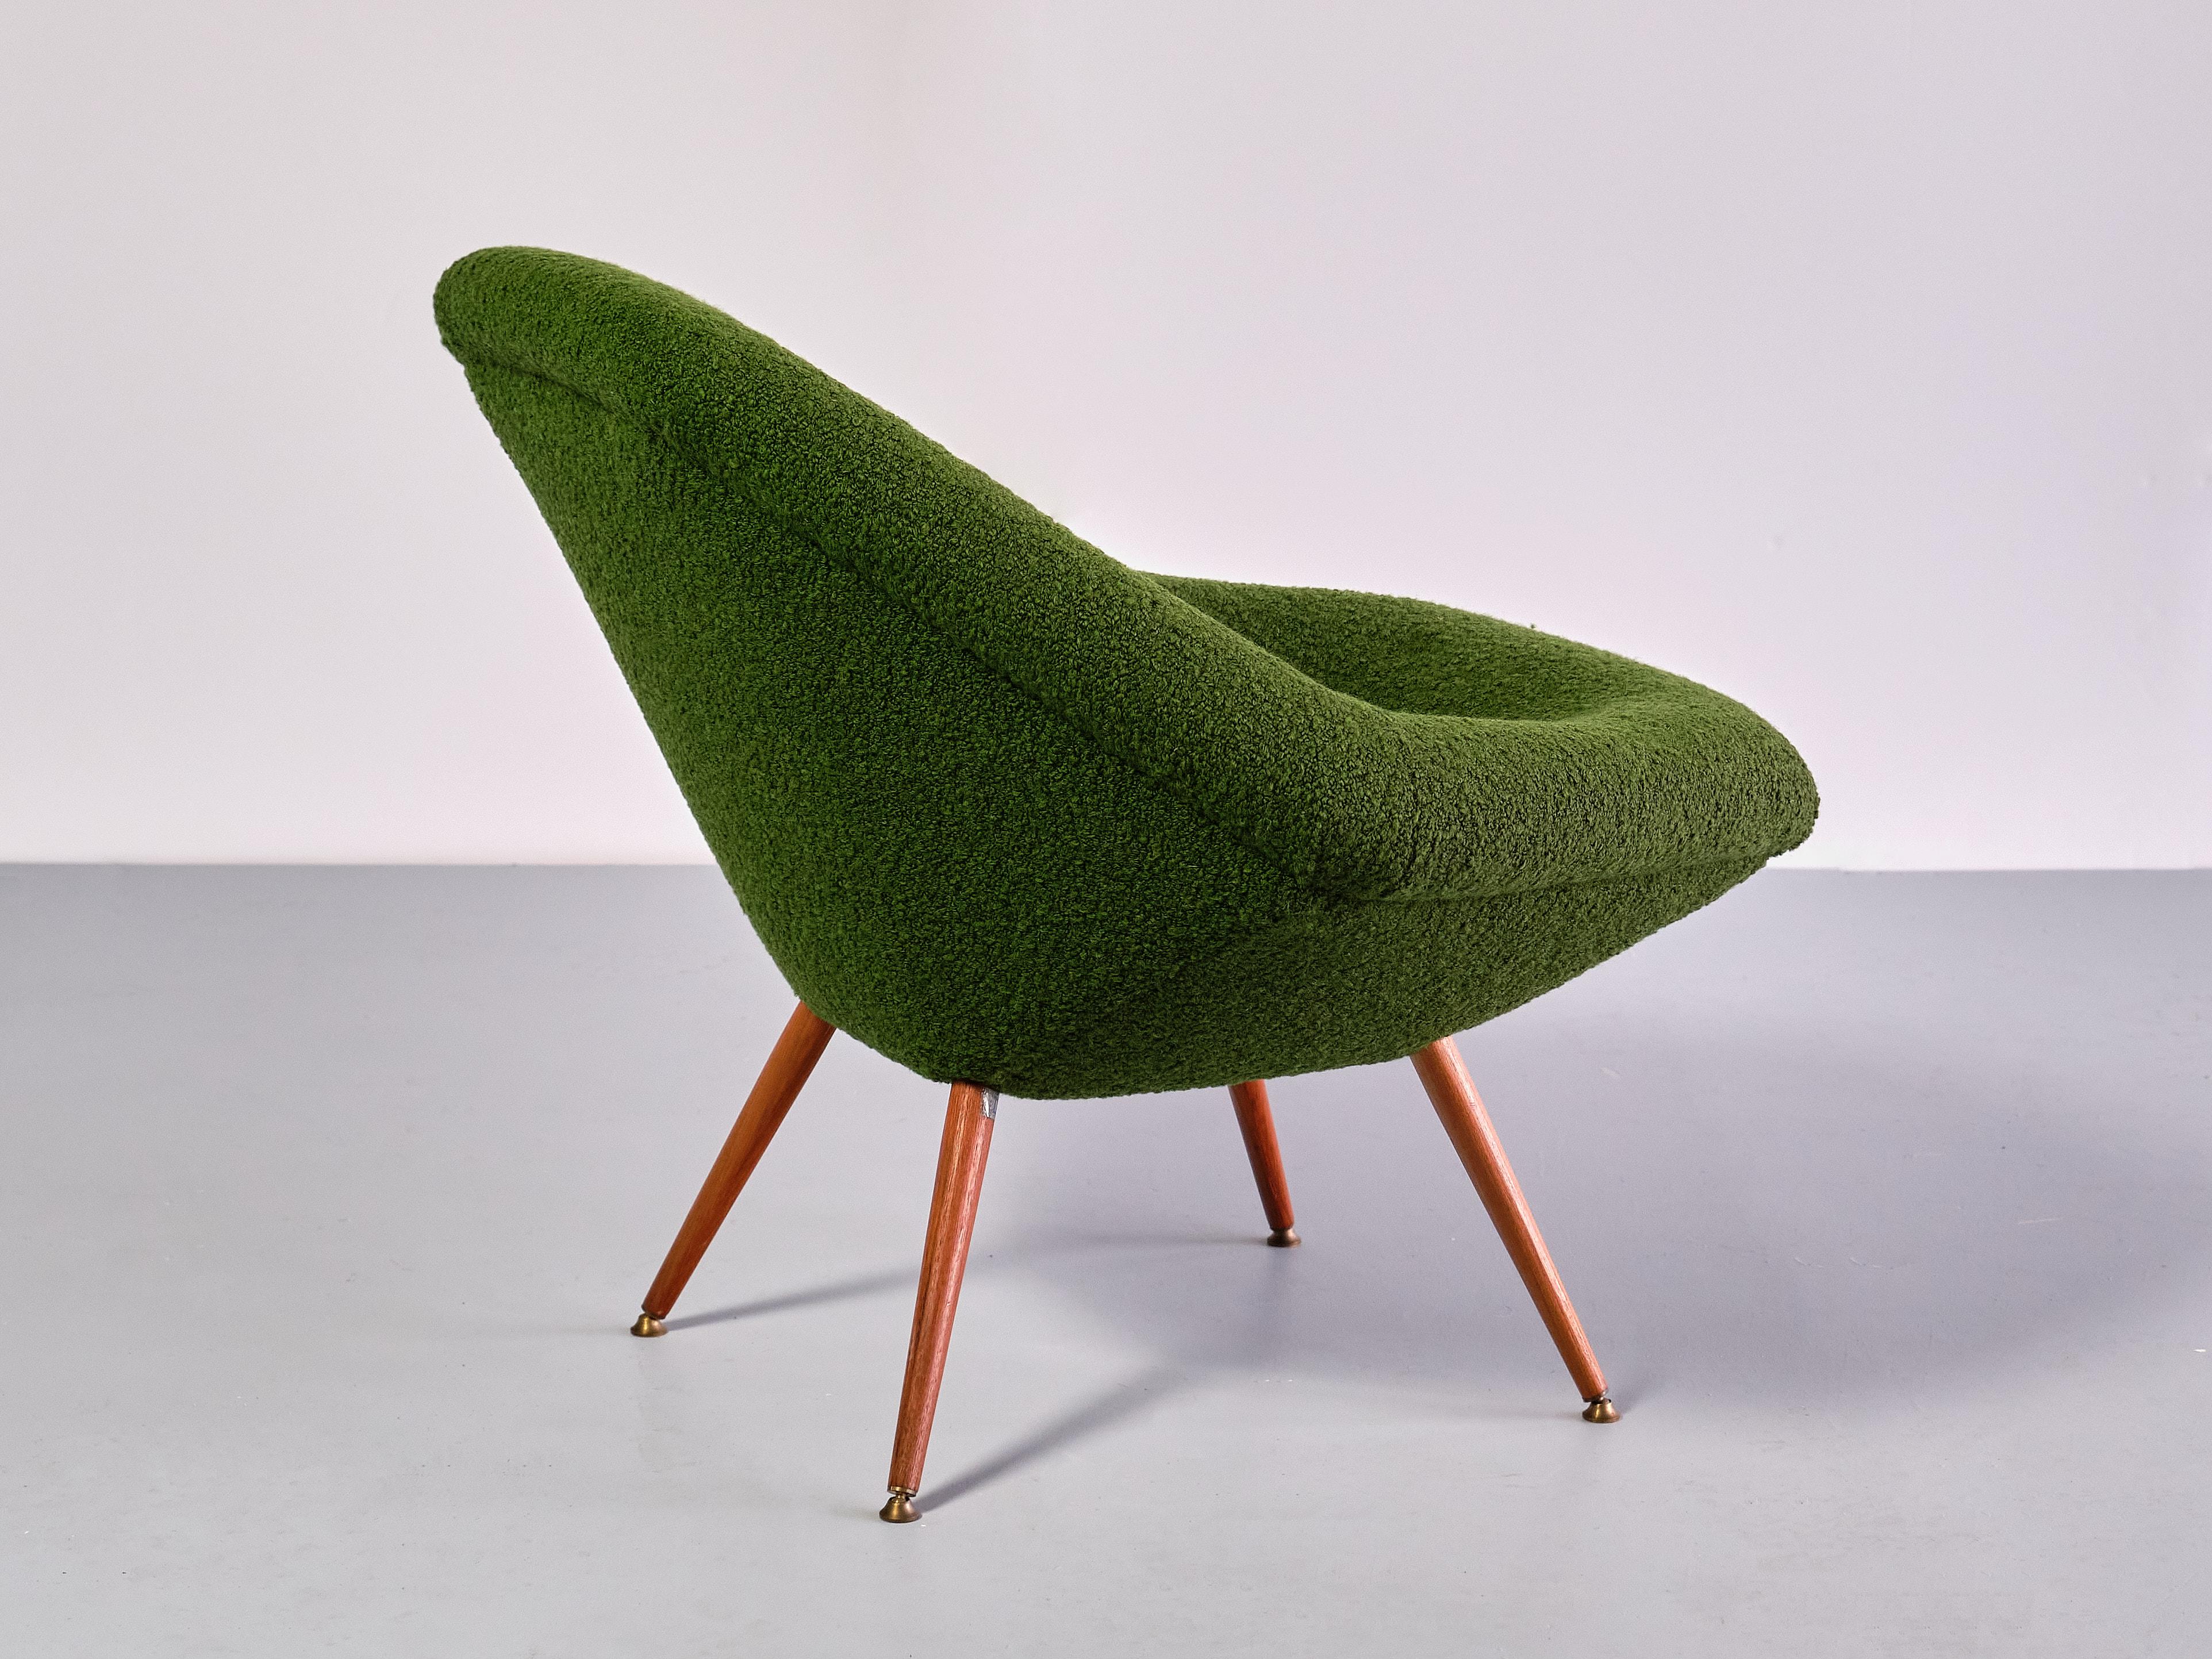 Pair of Arne Dahlén Lounge Chairs in Green Bouclé and Teak, Sweden, 1960s For Sale 2